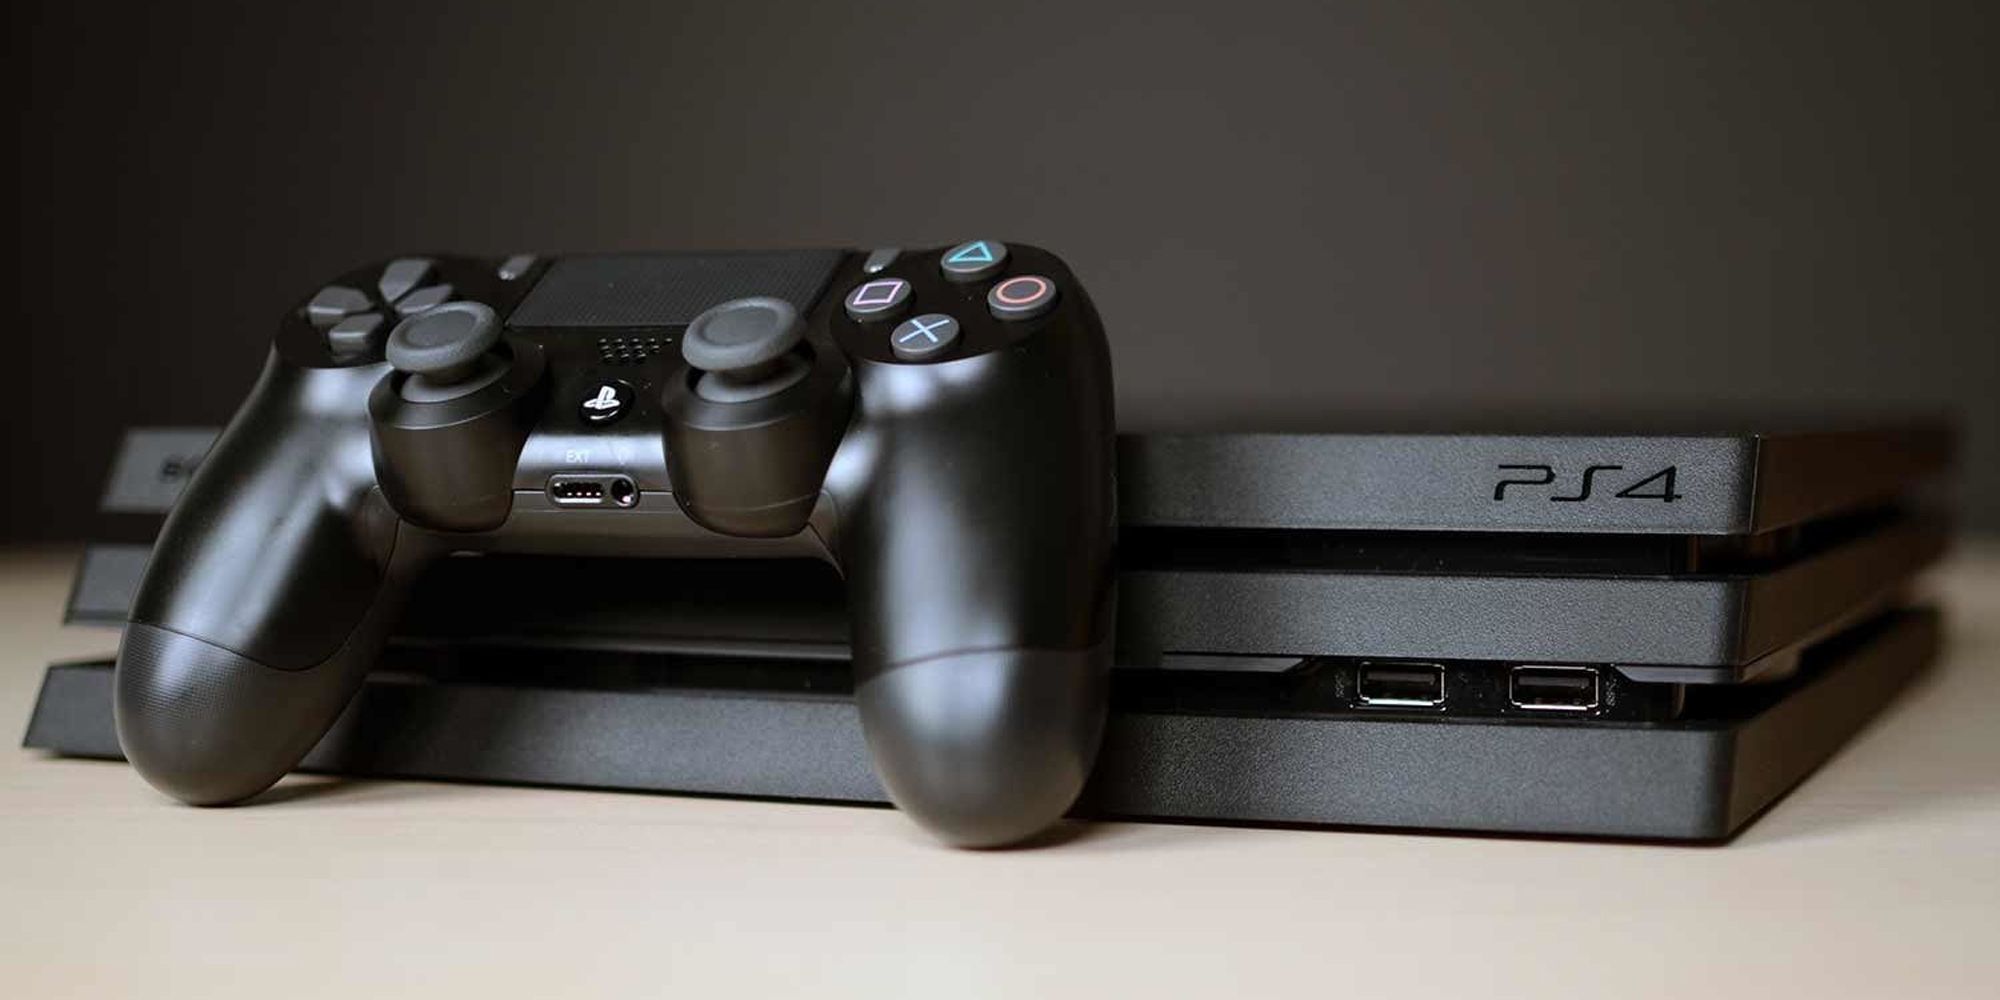 PS4 Controller Leaning On PS4